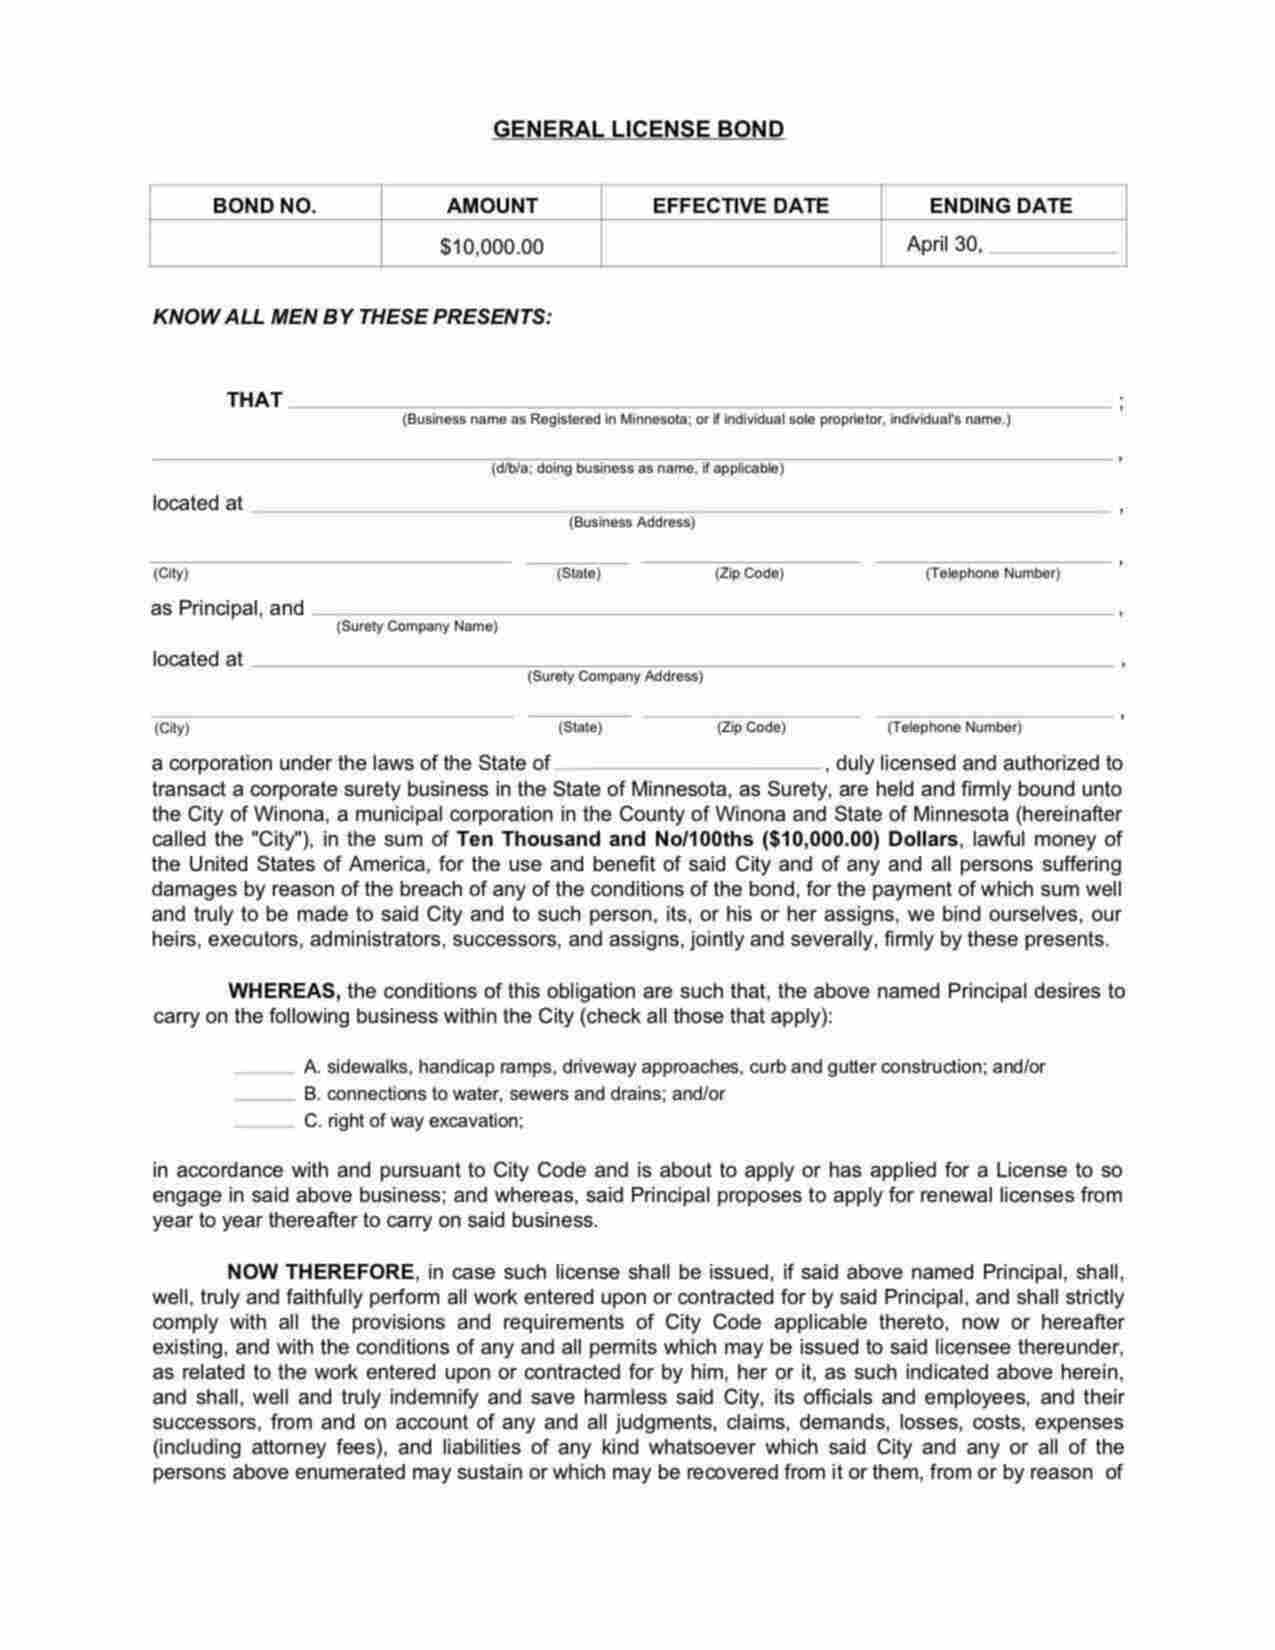 Minnesota General License: Sewer Connections Bond Form